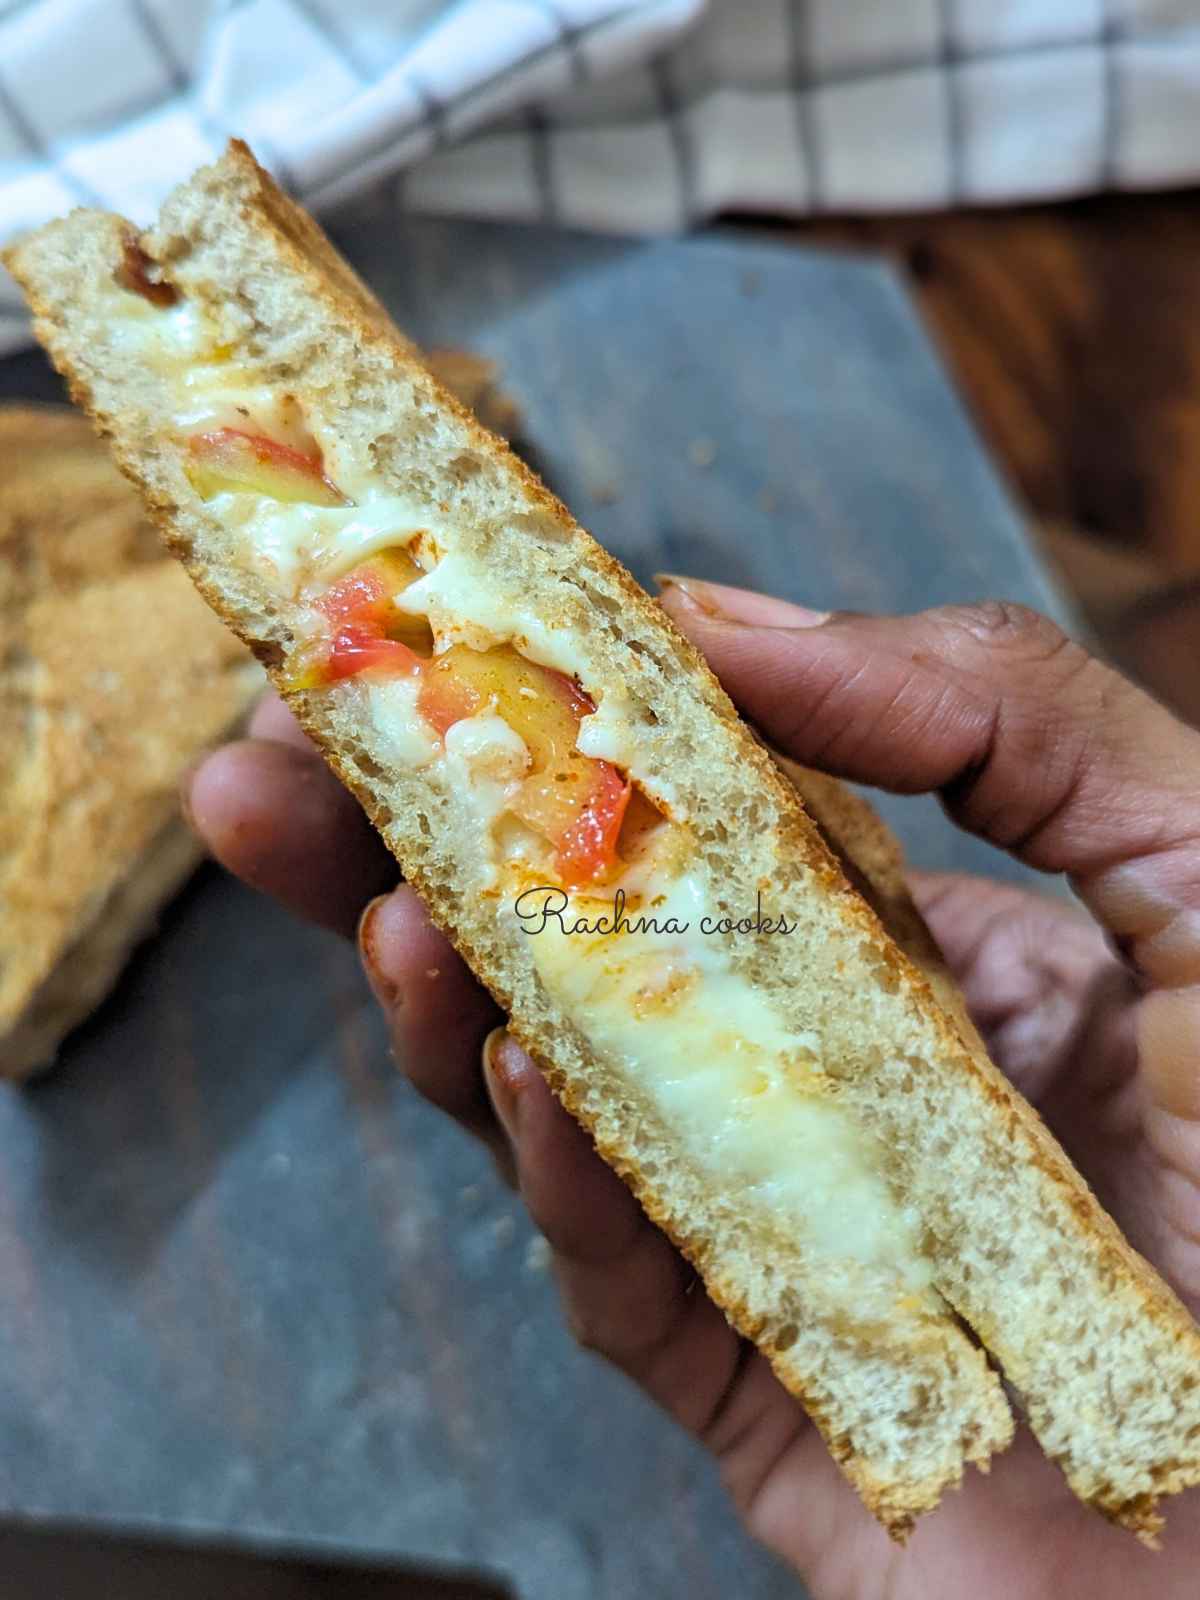 Half of tomato cheese melt sandwich held up in hand.